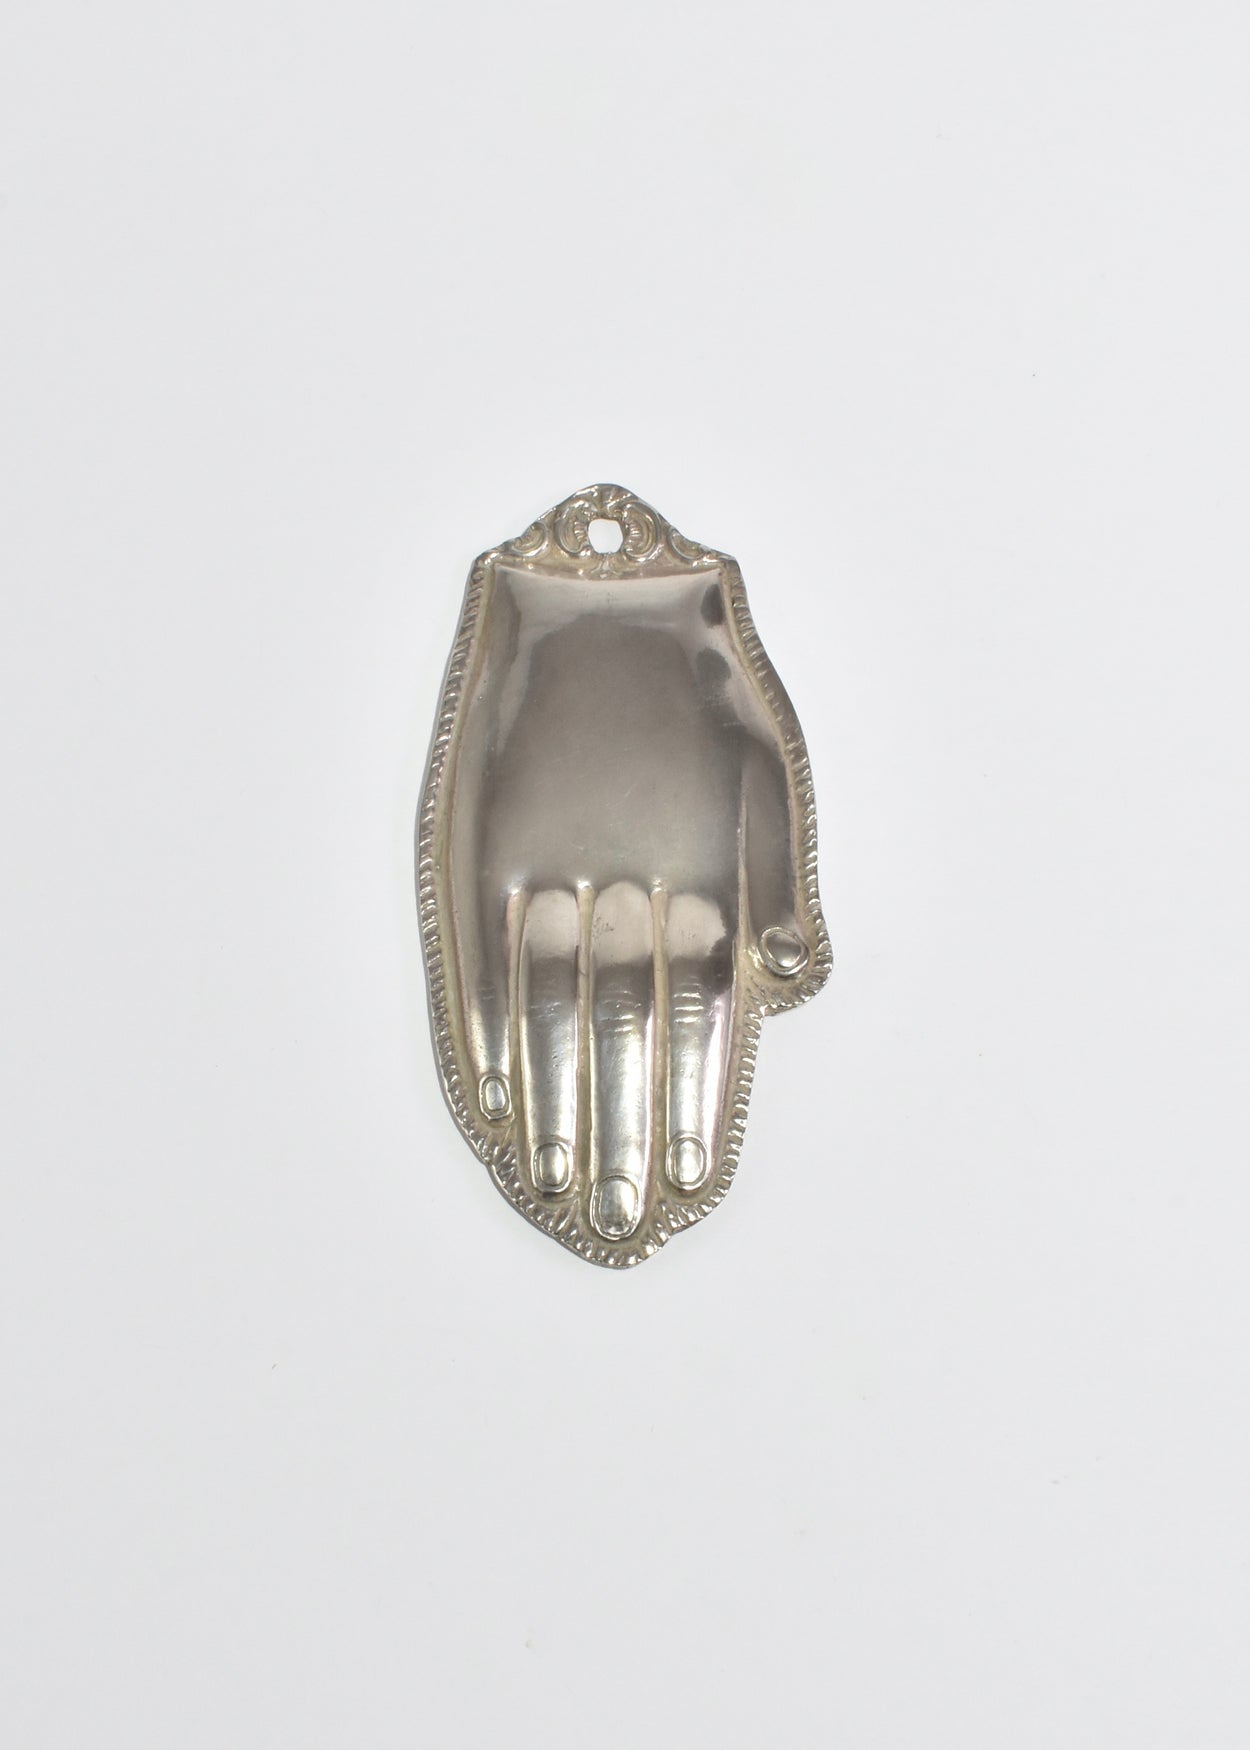 Pewter Hand Ornament